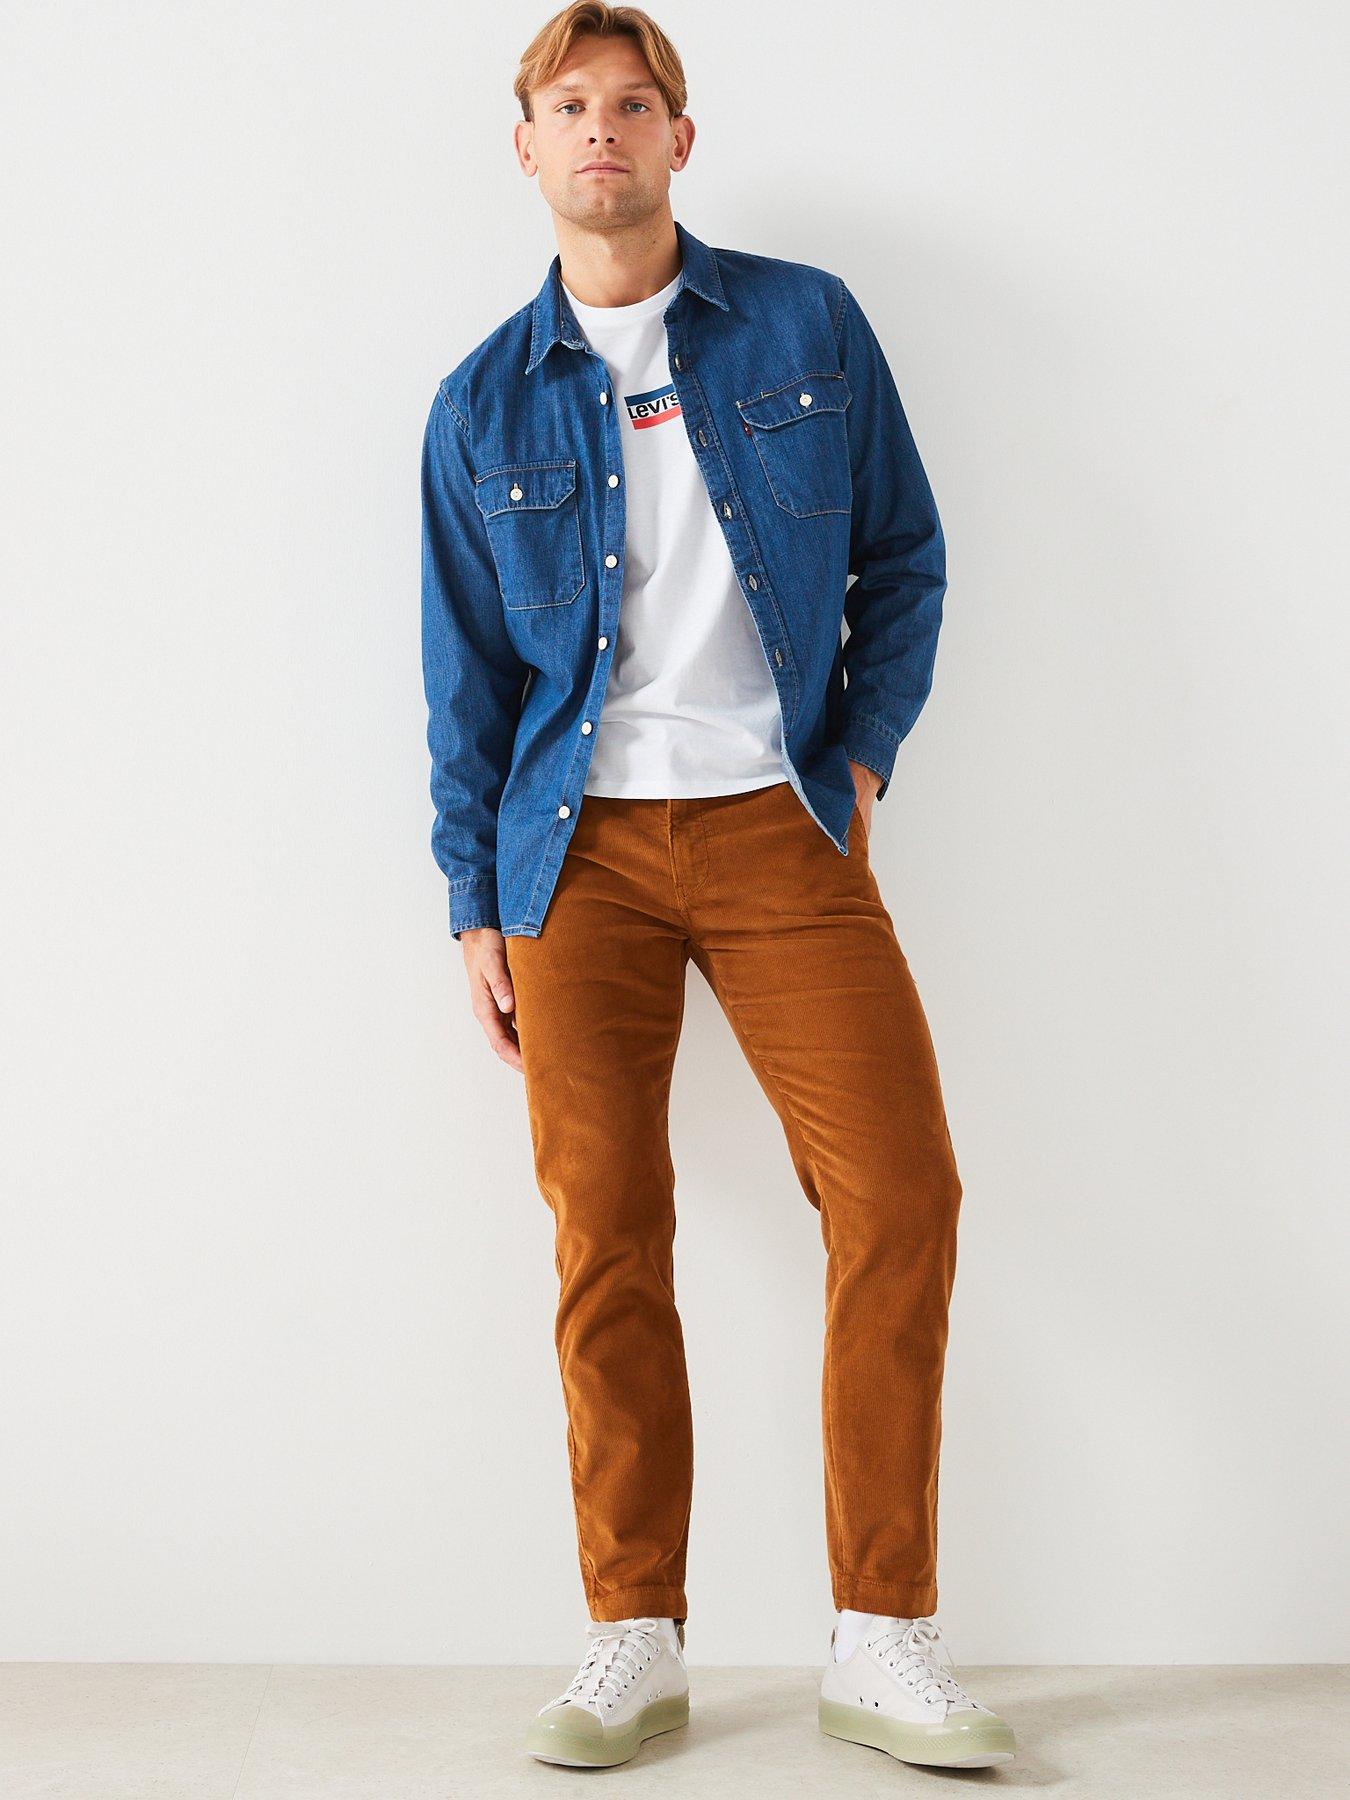 Levi's XX Chino Standard Trousers - Brown | very.co.uk